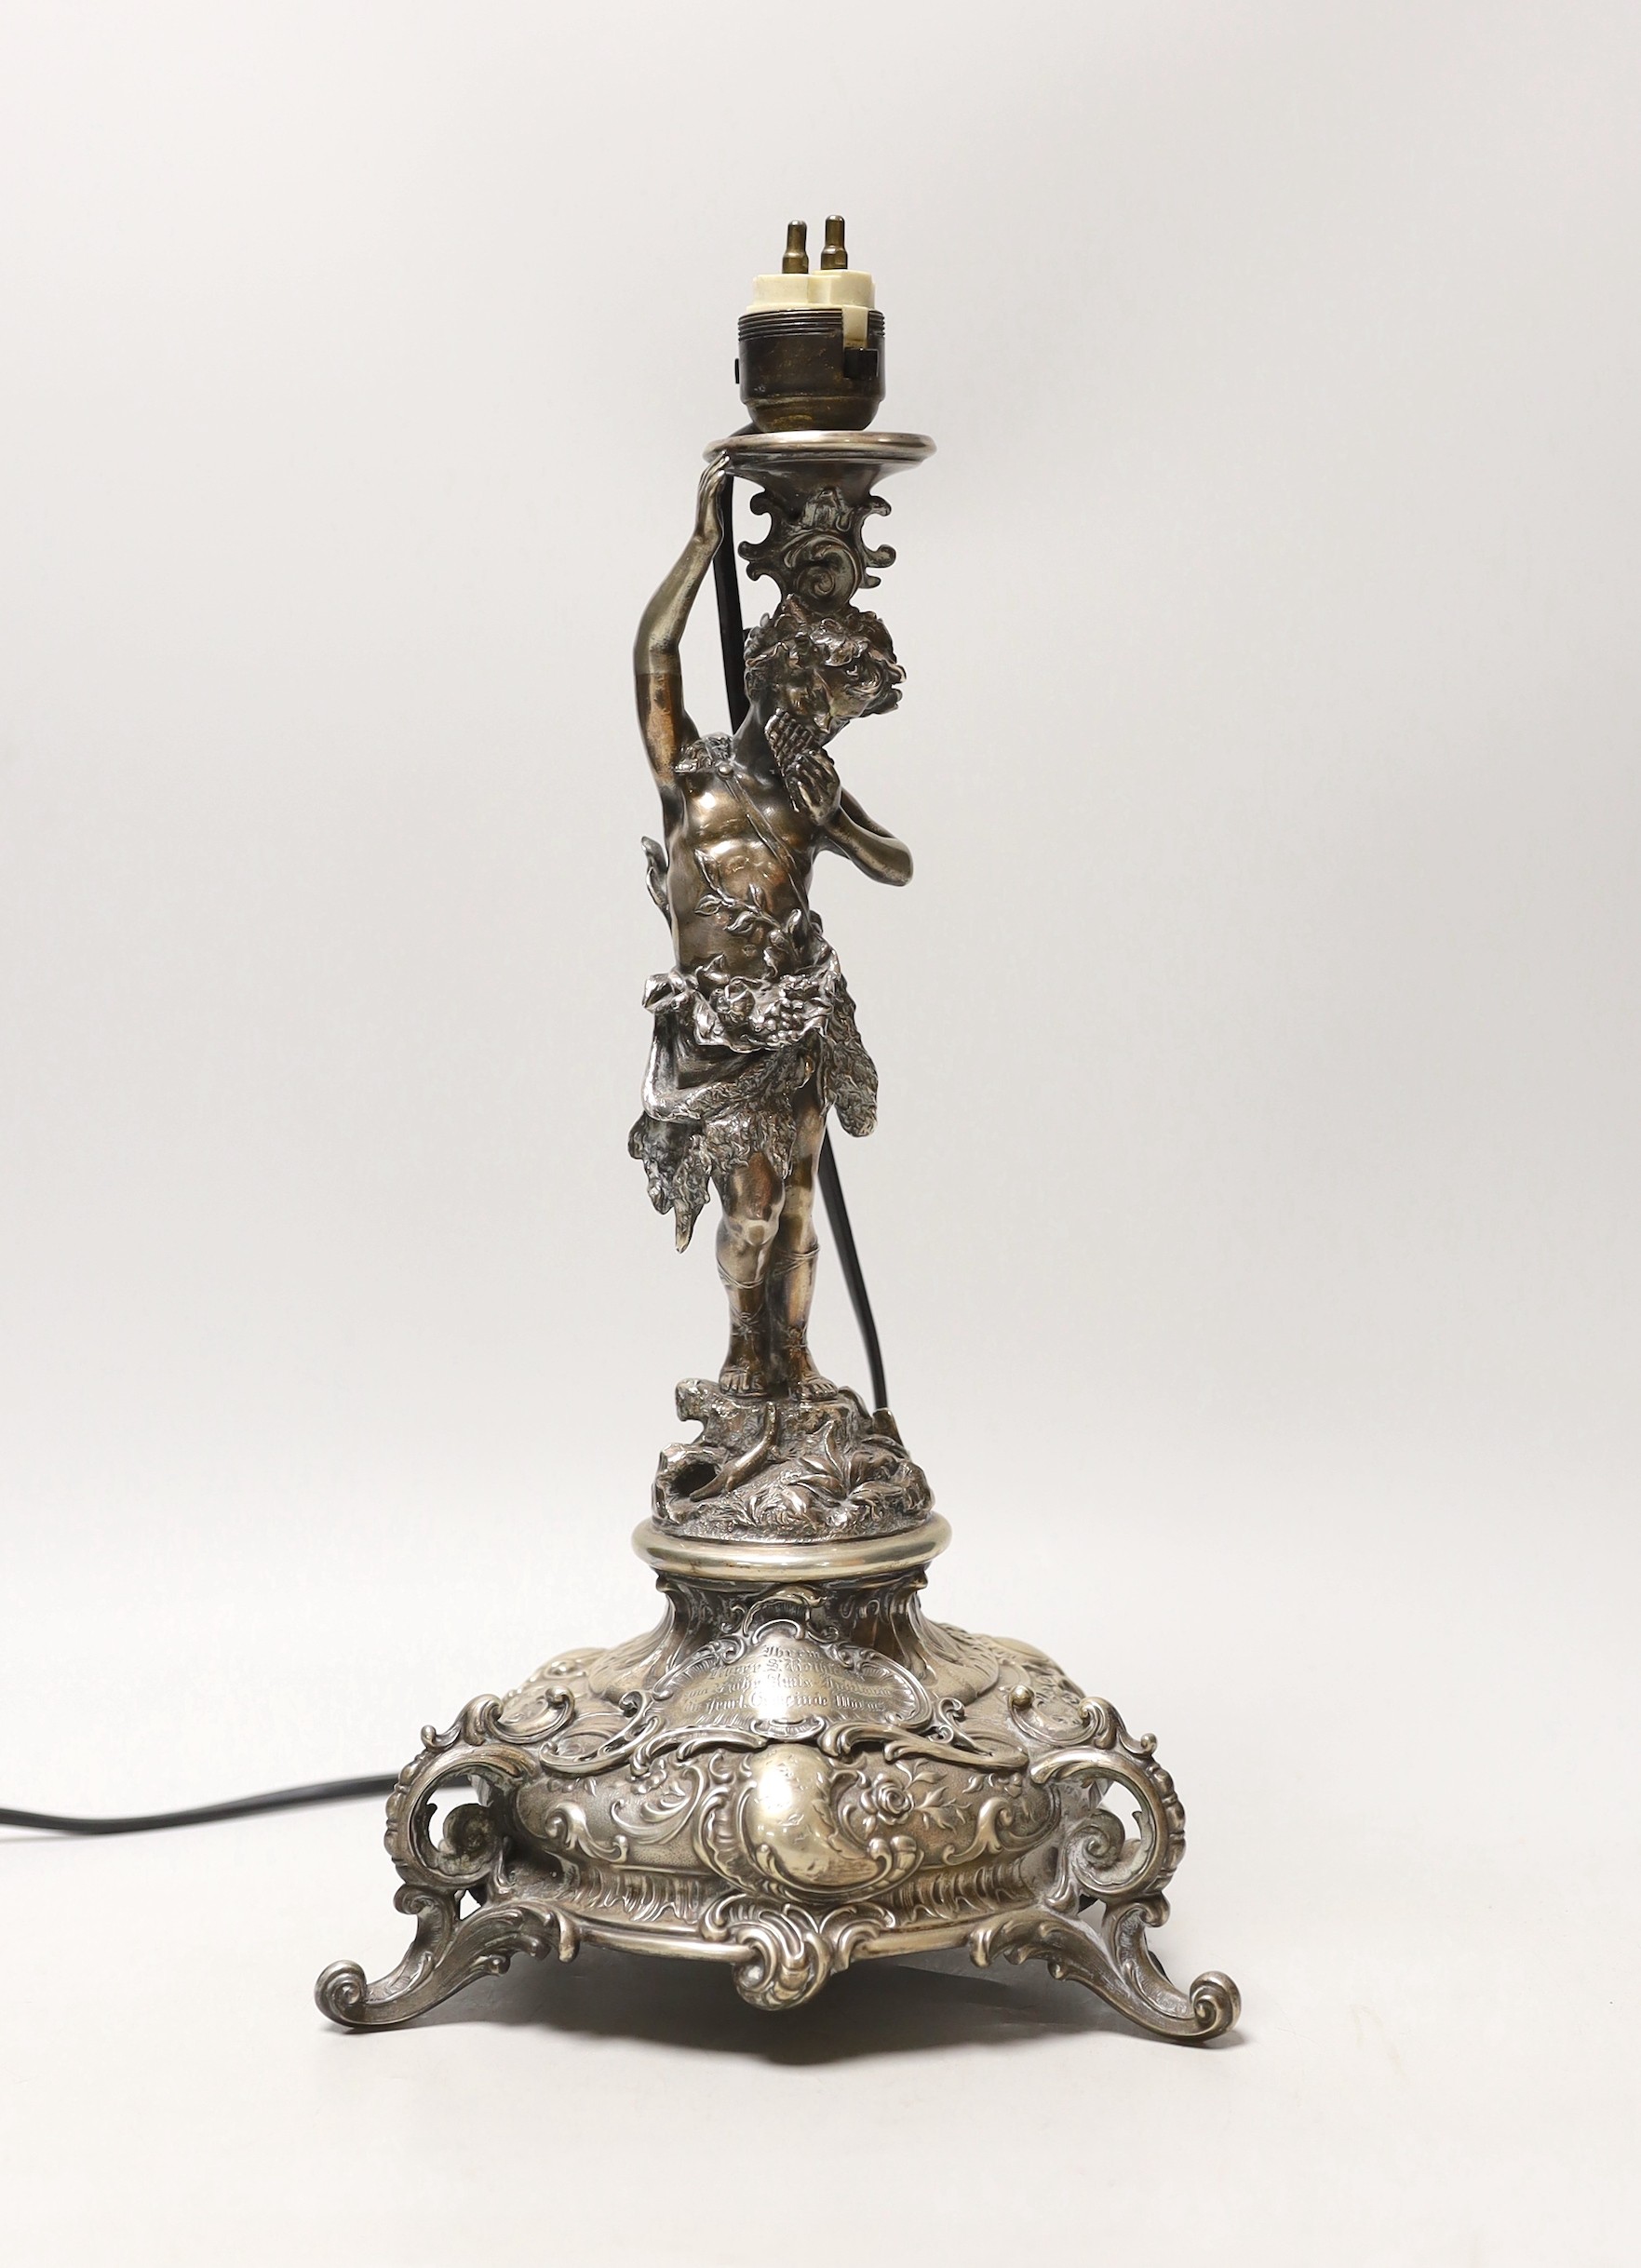 A late 19th century German 800 standard figural table lamp base, by Bruckmann & Sohne, height 37cm, gross weight 27.9oz.                                                                                                    